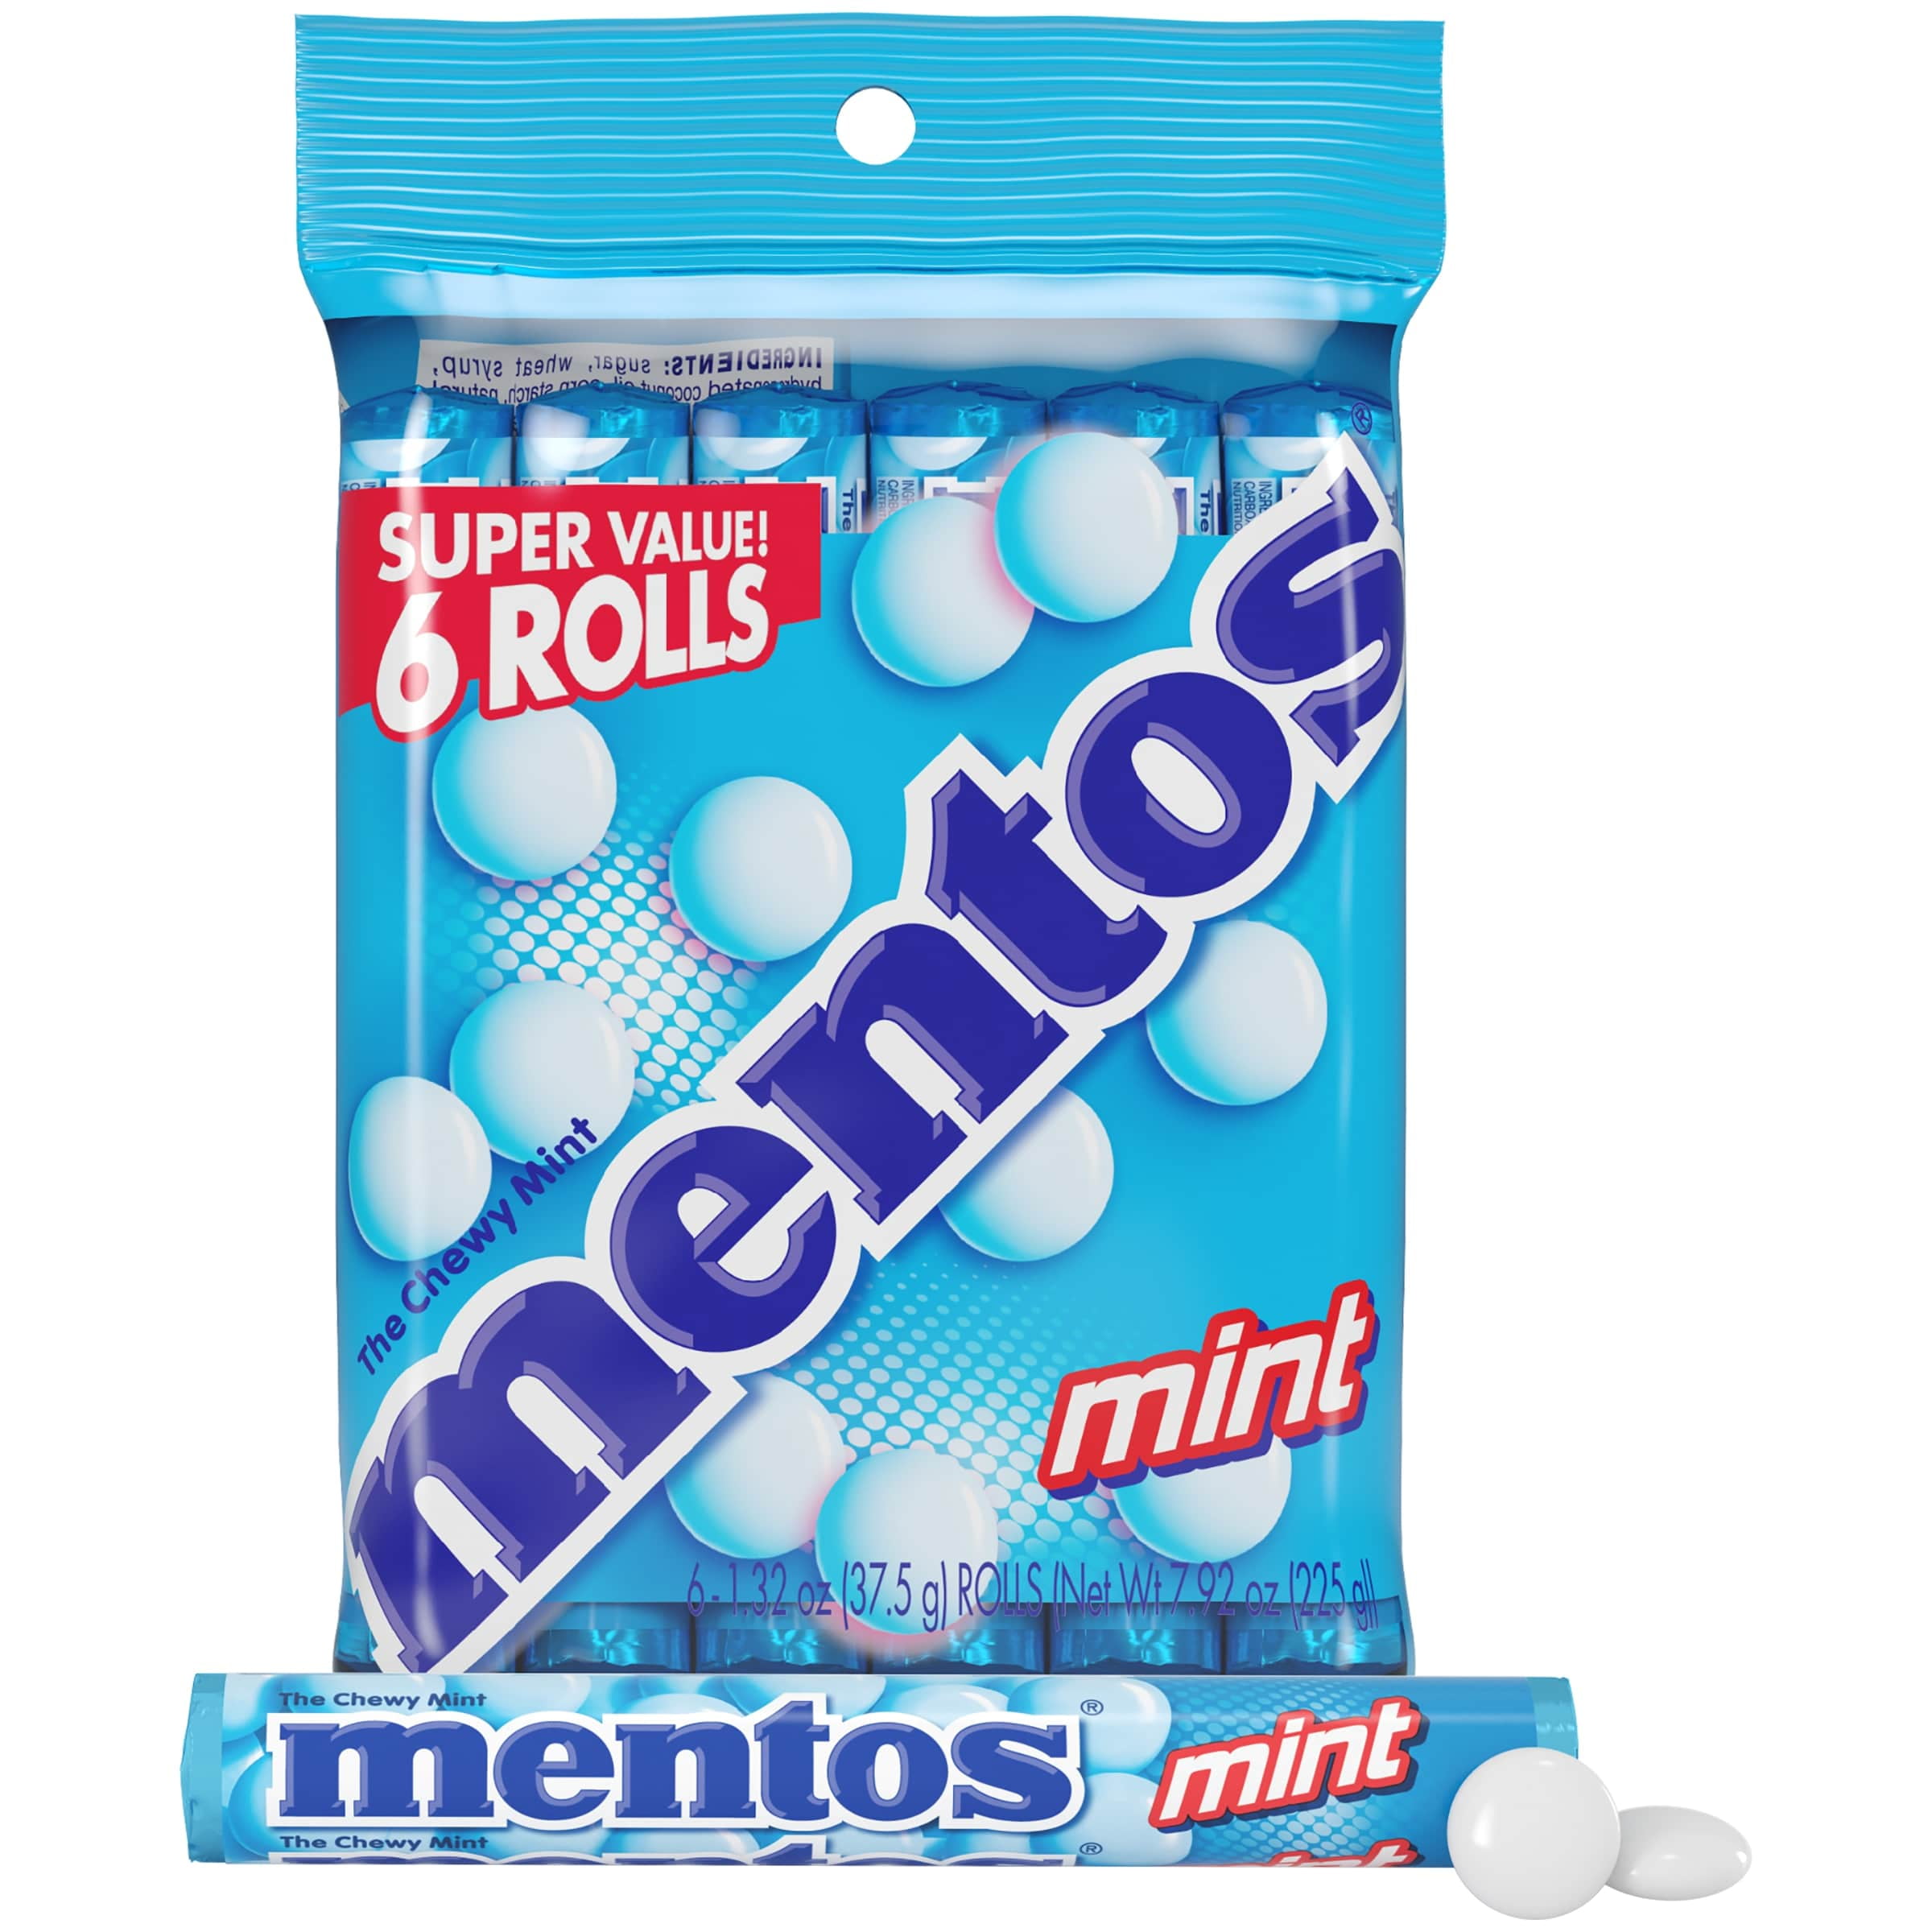 Mentos Chewy Mints - Mint - 15ct Display Box